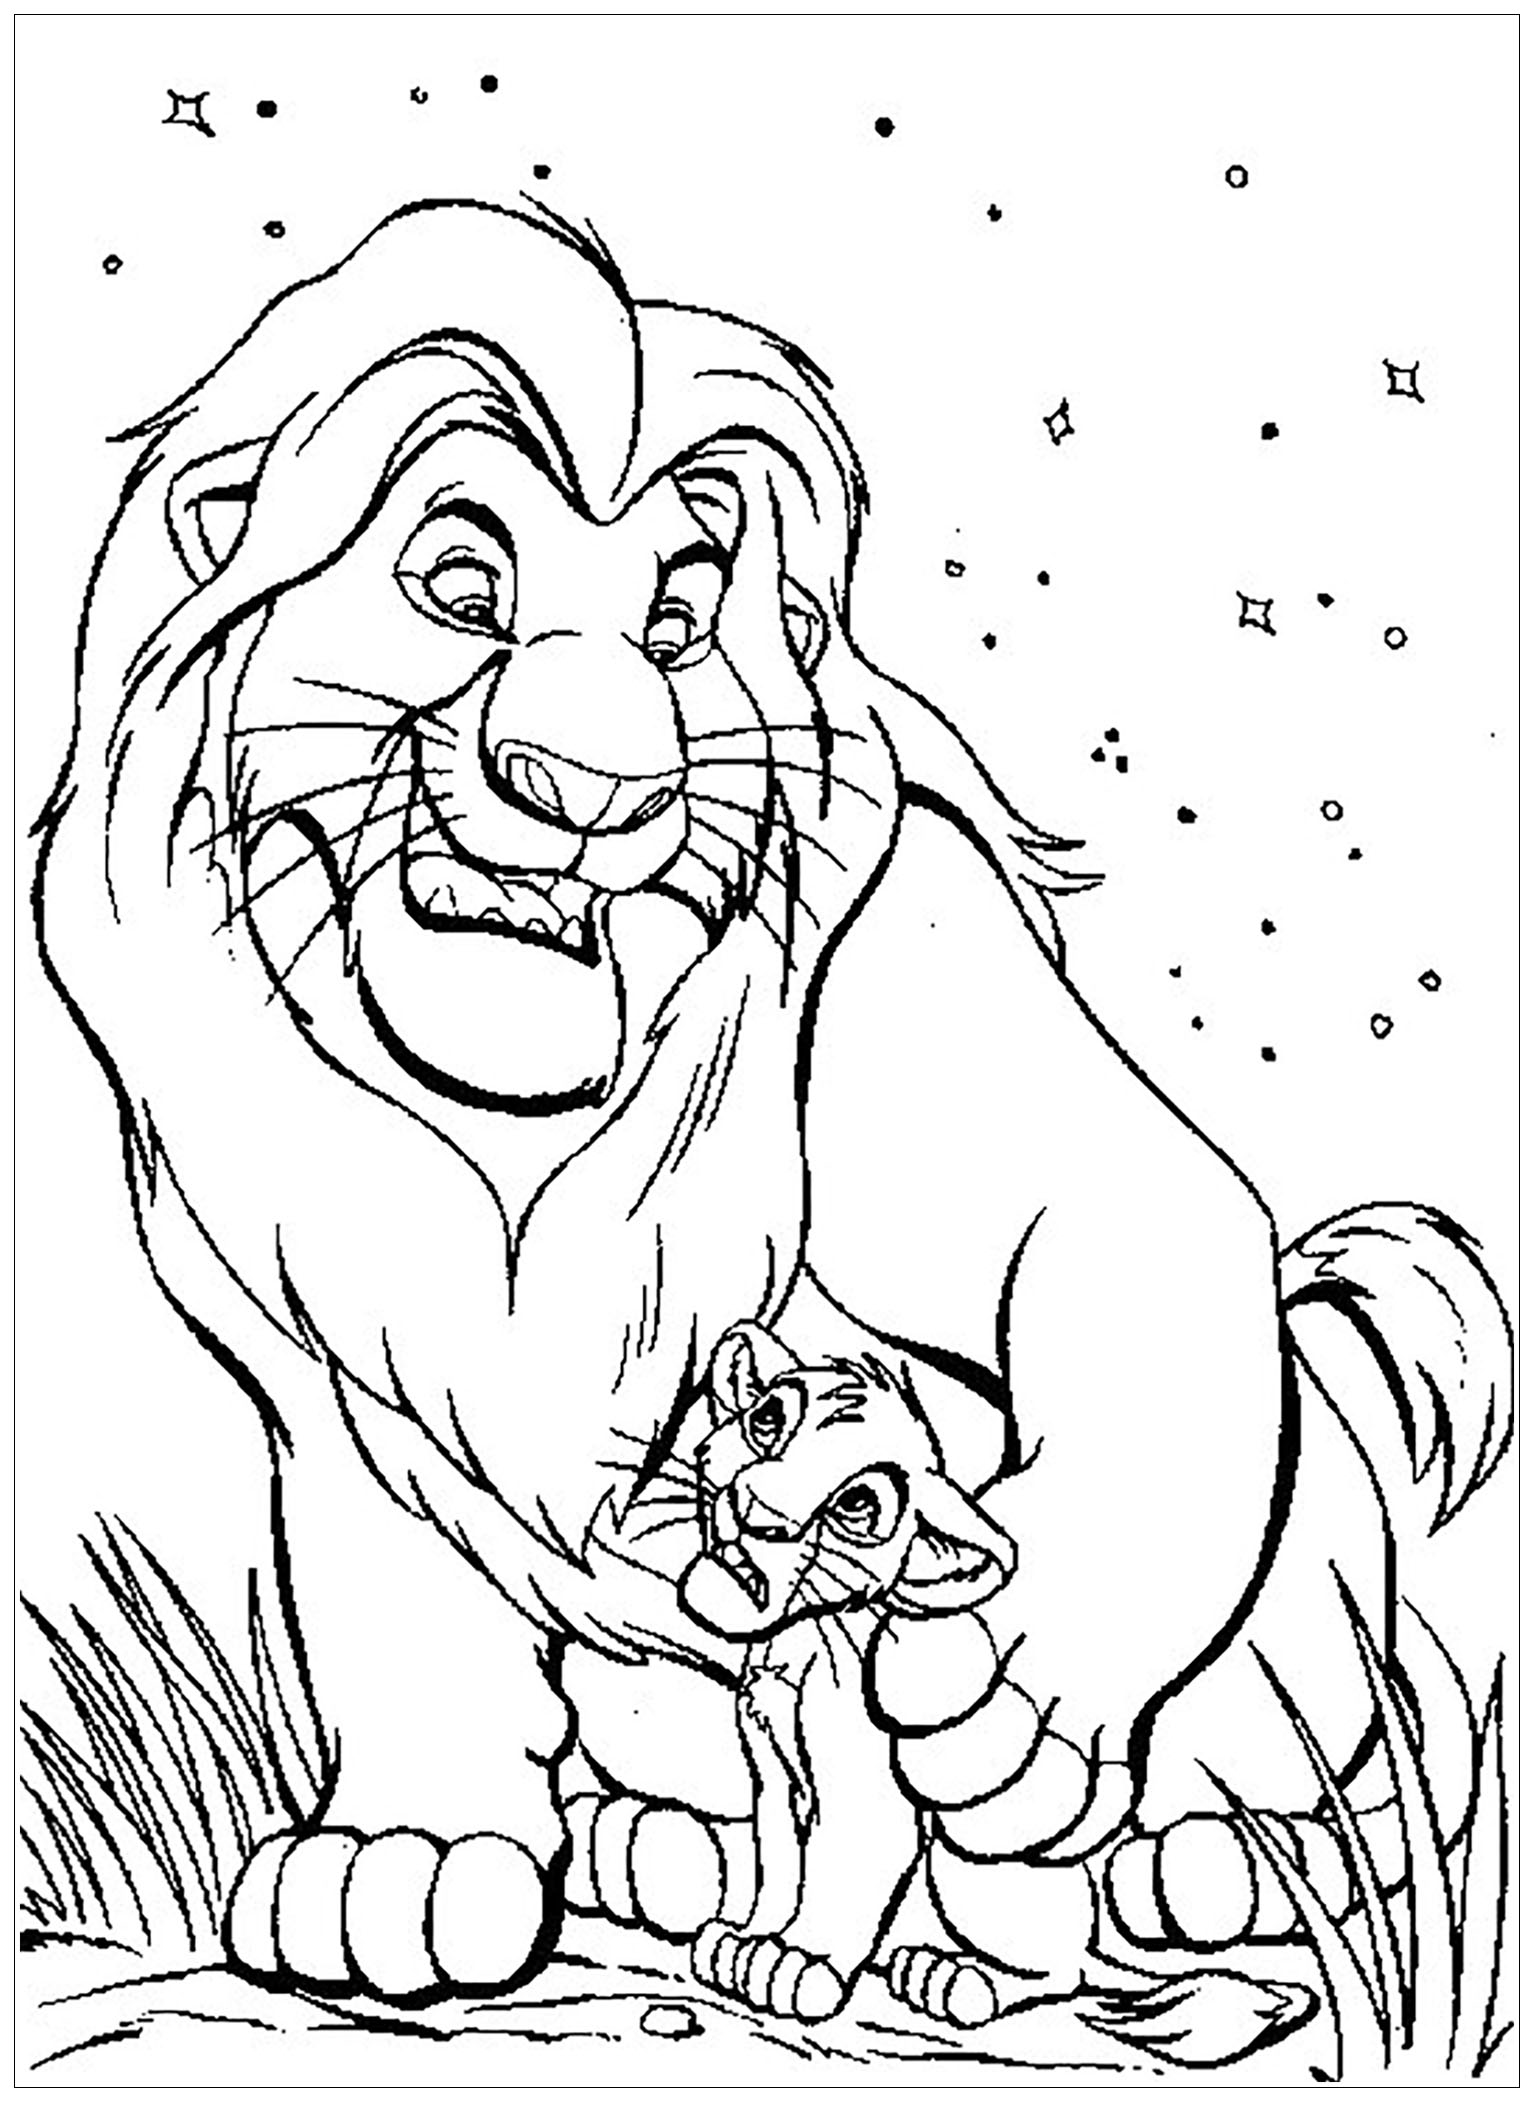 Mufasa with Simba The Lion King Kids Coloring Pages